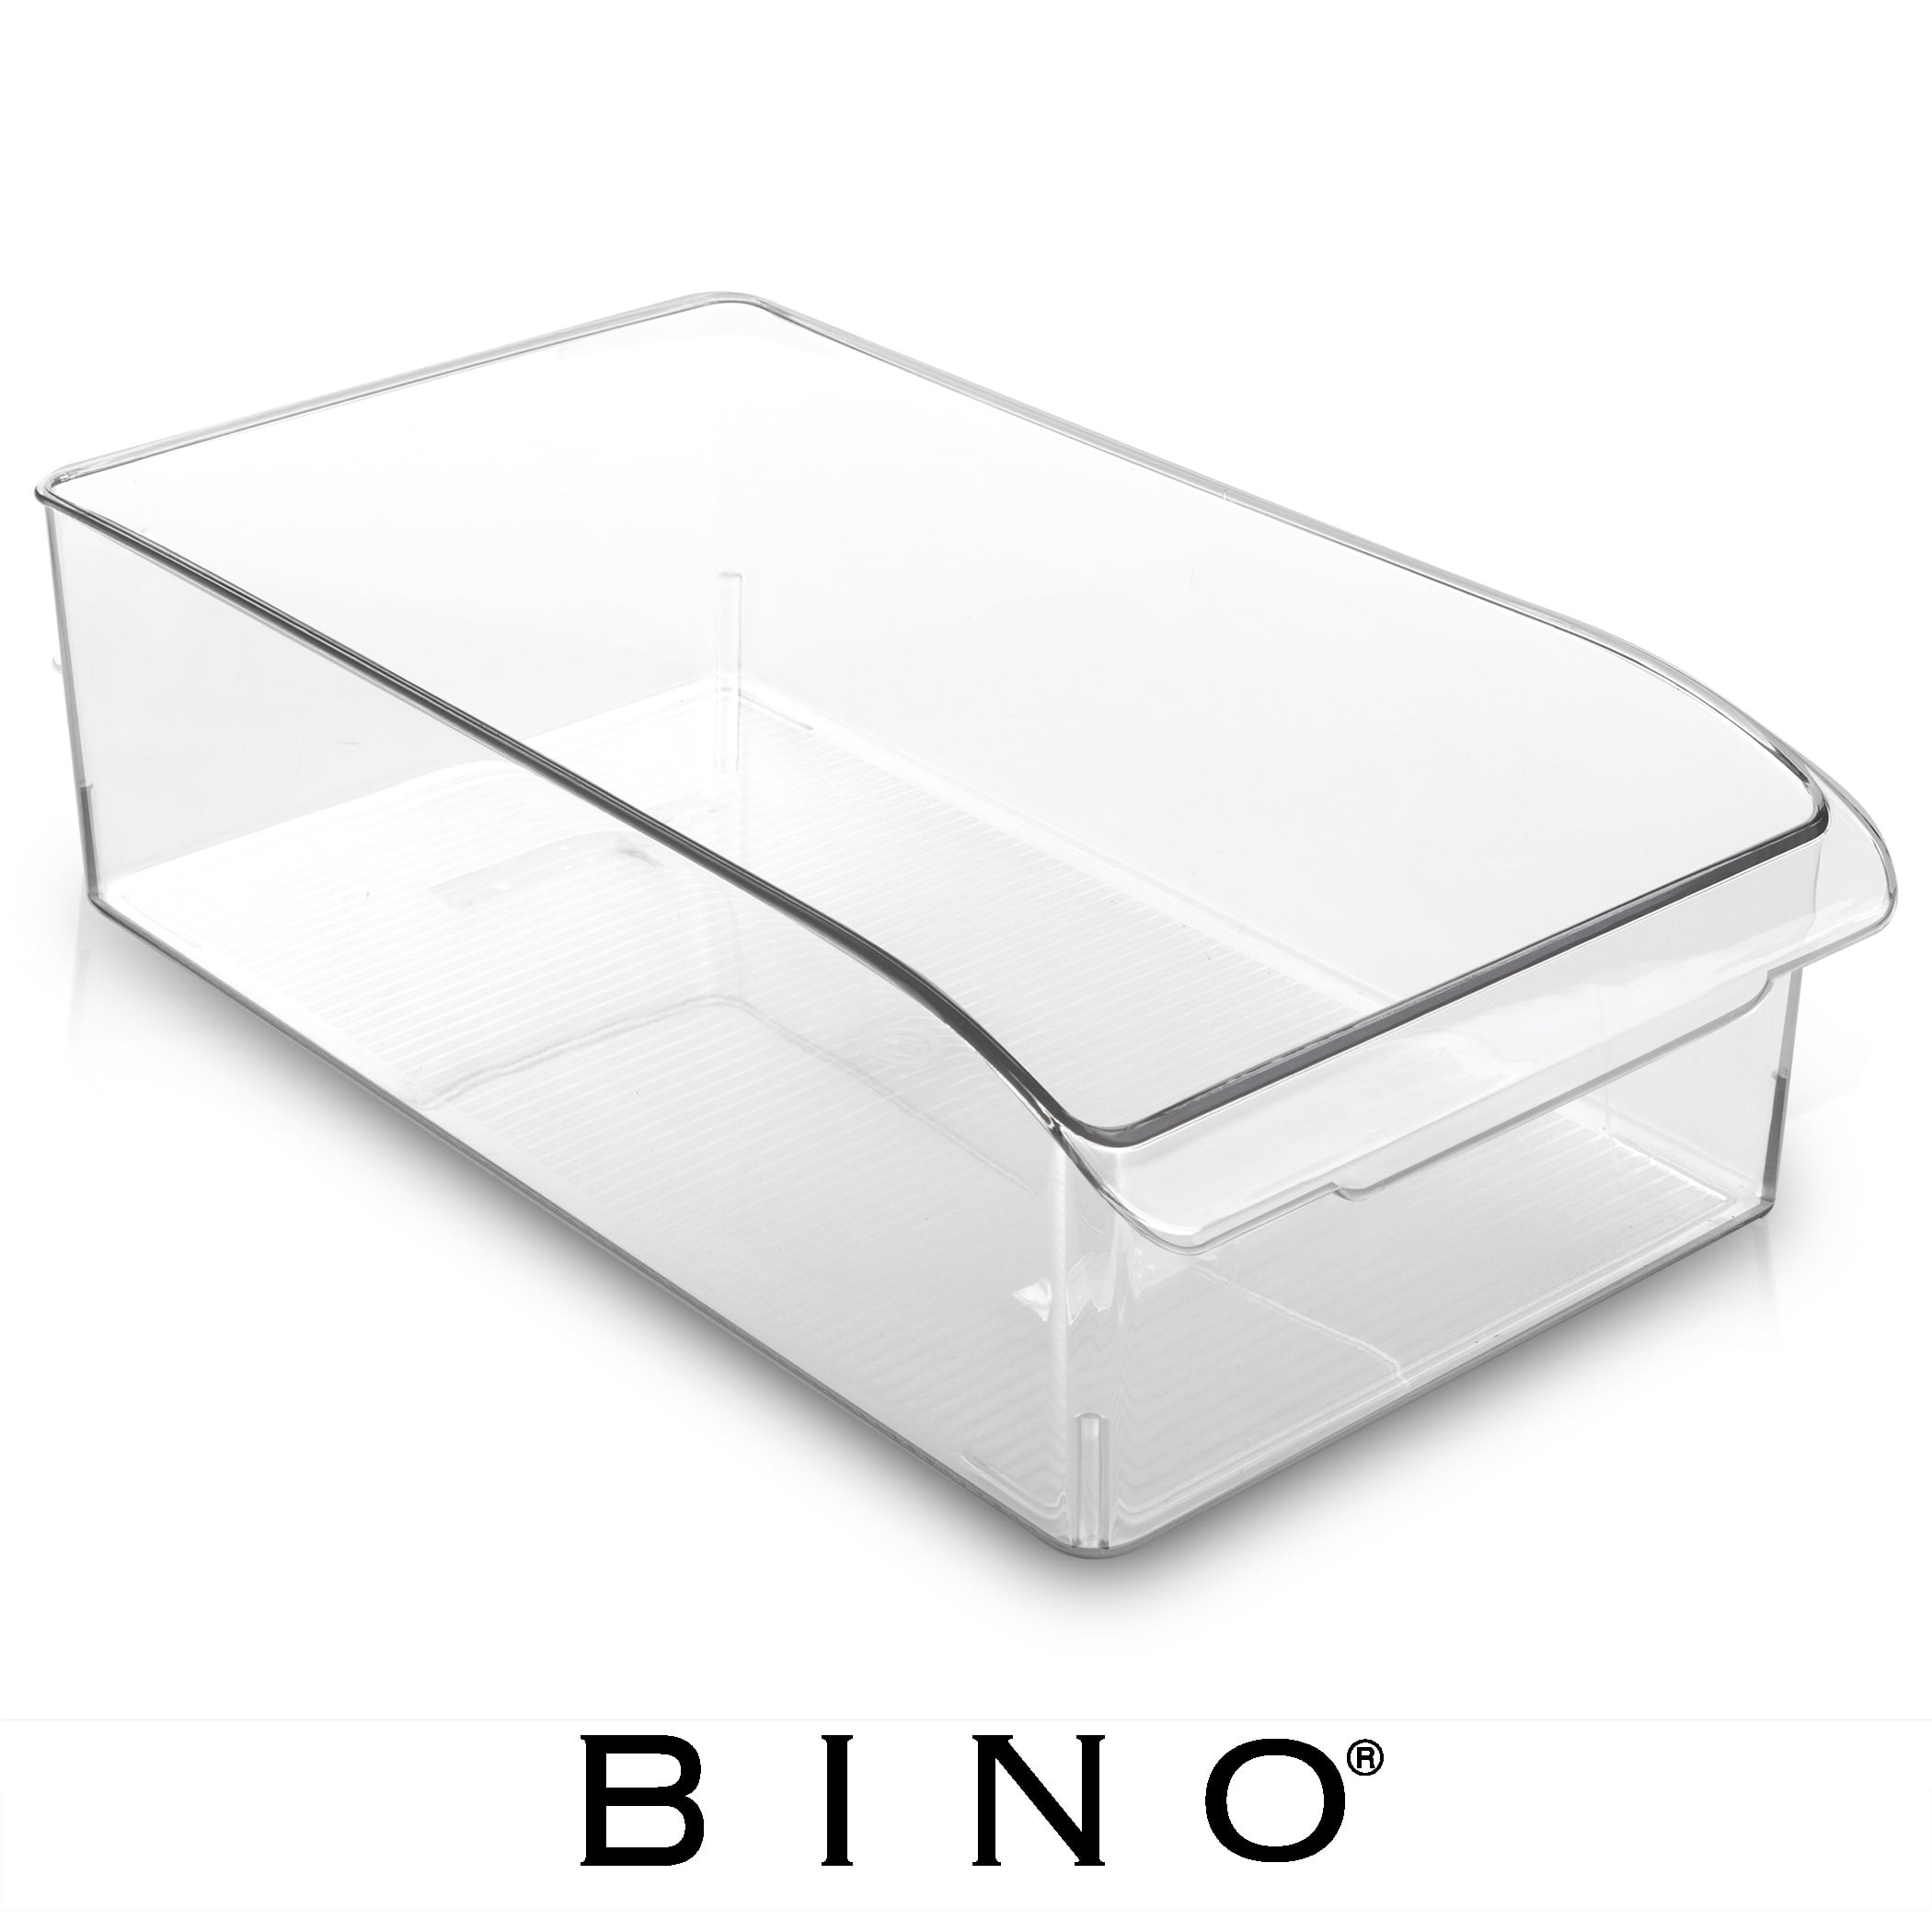 BINO Refrigerator, Freezer and Pantry Cabinet Storage Drawer Organizer Bin,  Clear and Transparent Plastic Nesting Container for Home and Kitchen with  Built-In Pull Out Handle, Large 